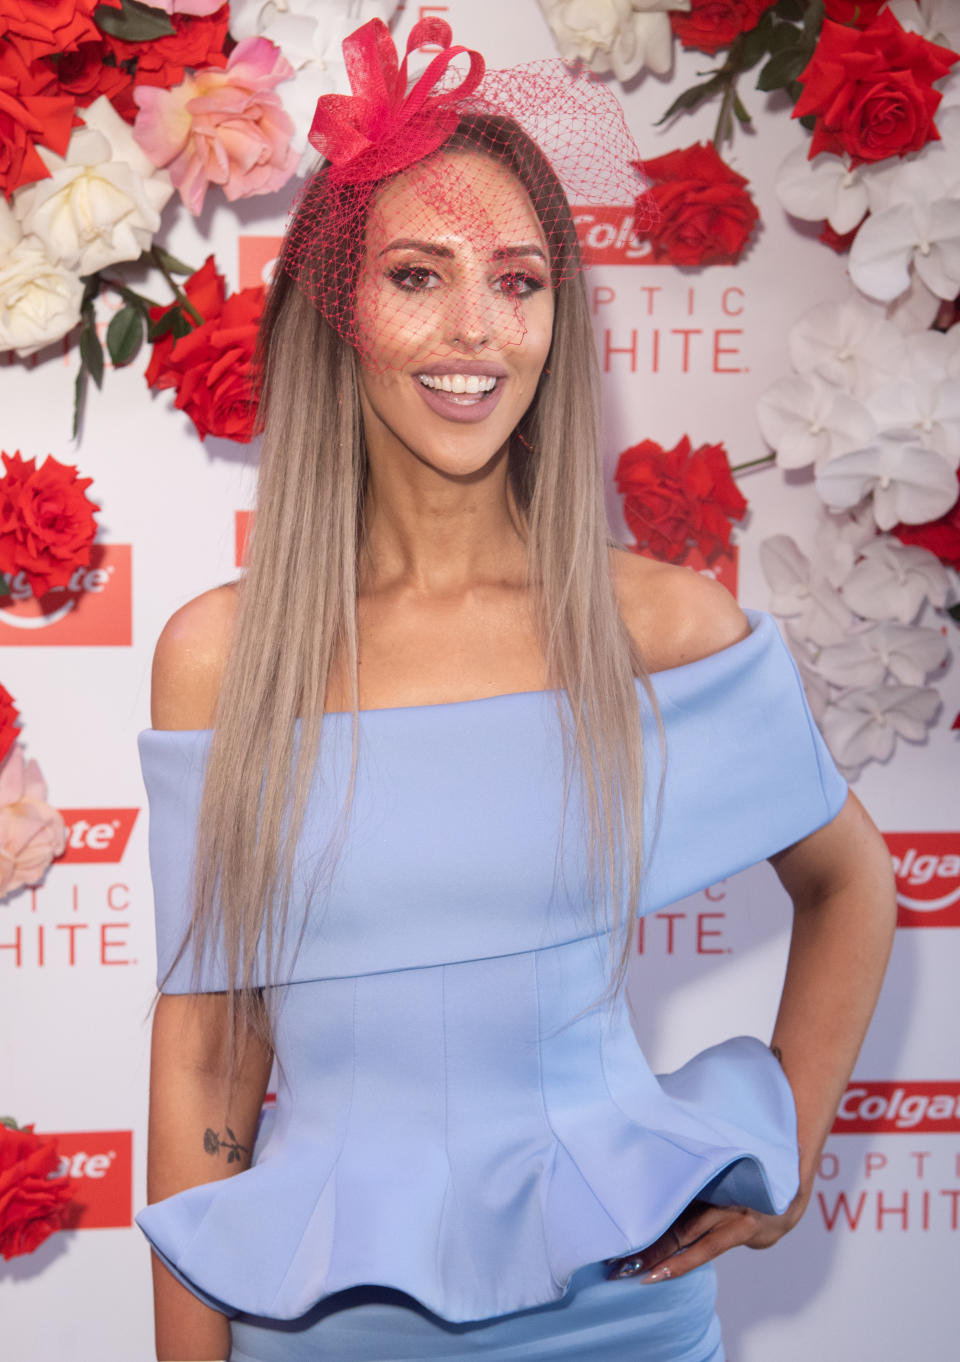 SYDNEY, AUSTRALIA - SEPTEMBER 21: Elizabeth Sobinoff attends Colgate Optic White Stakes Day at Royal Randwick Racecourse on September 21, 2019 in Sydney, Australia. (Photo by James Gourley/Getty Images for Australian Turf Club)